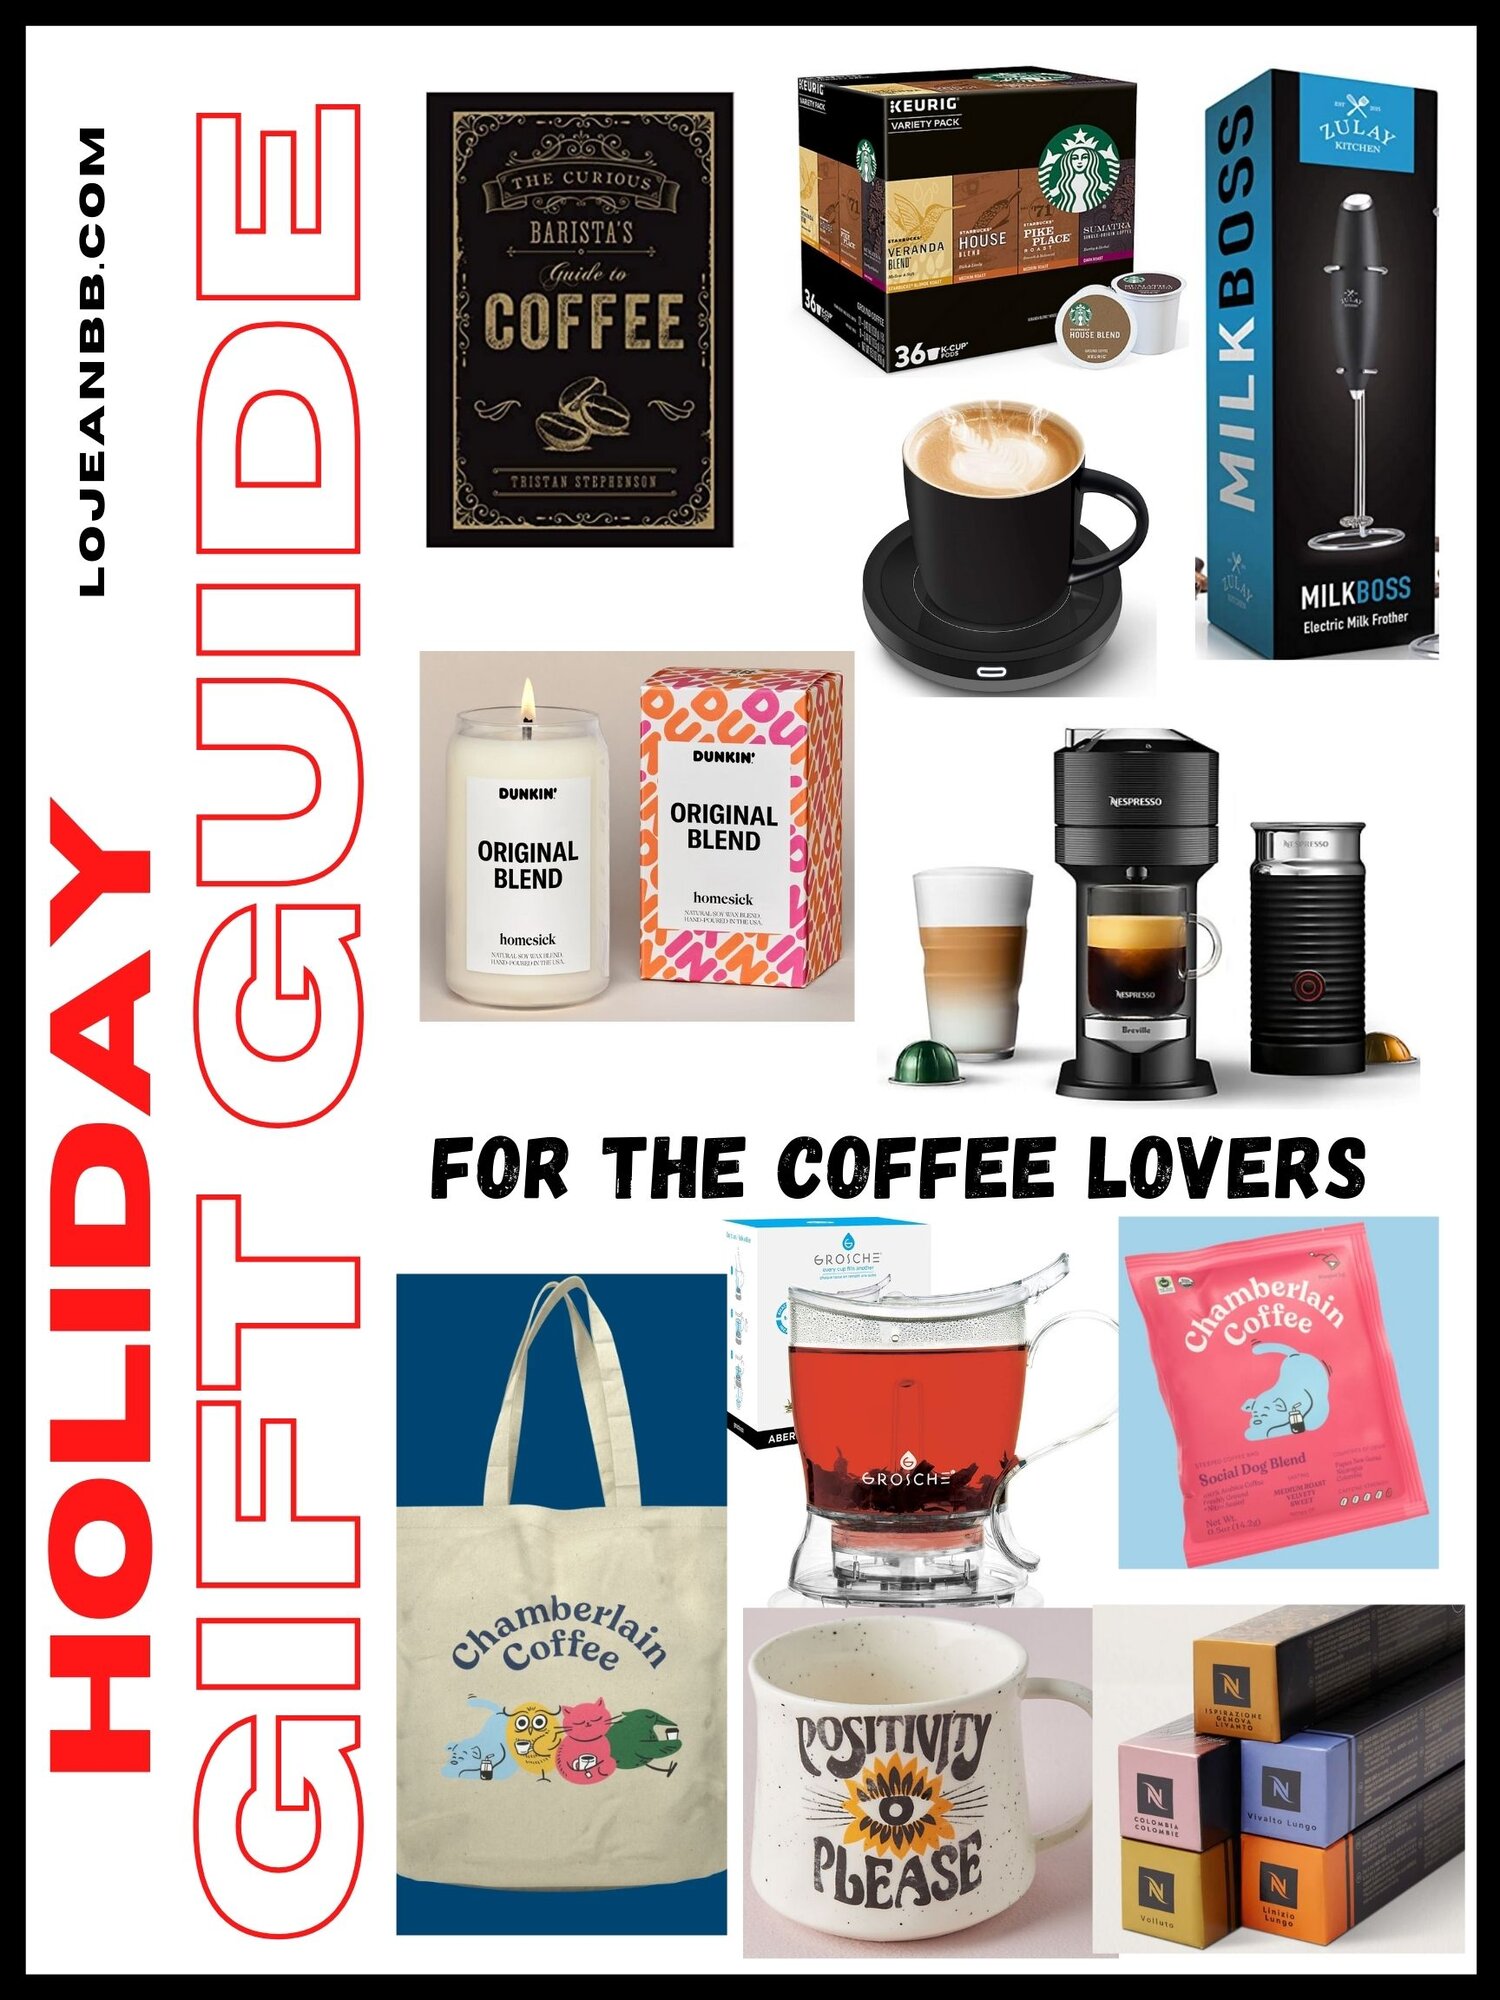 Holiday Gift Guide 2020: Coffee Lovers Gift Ideas — Eatwell101